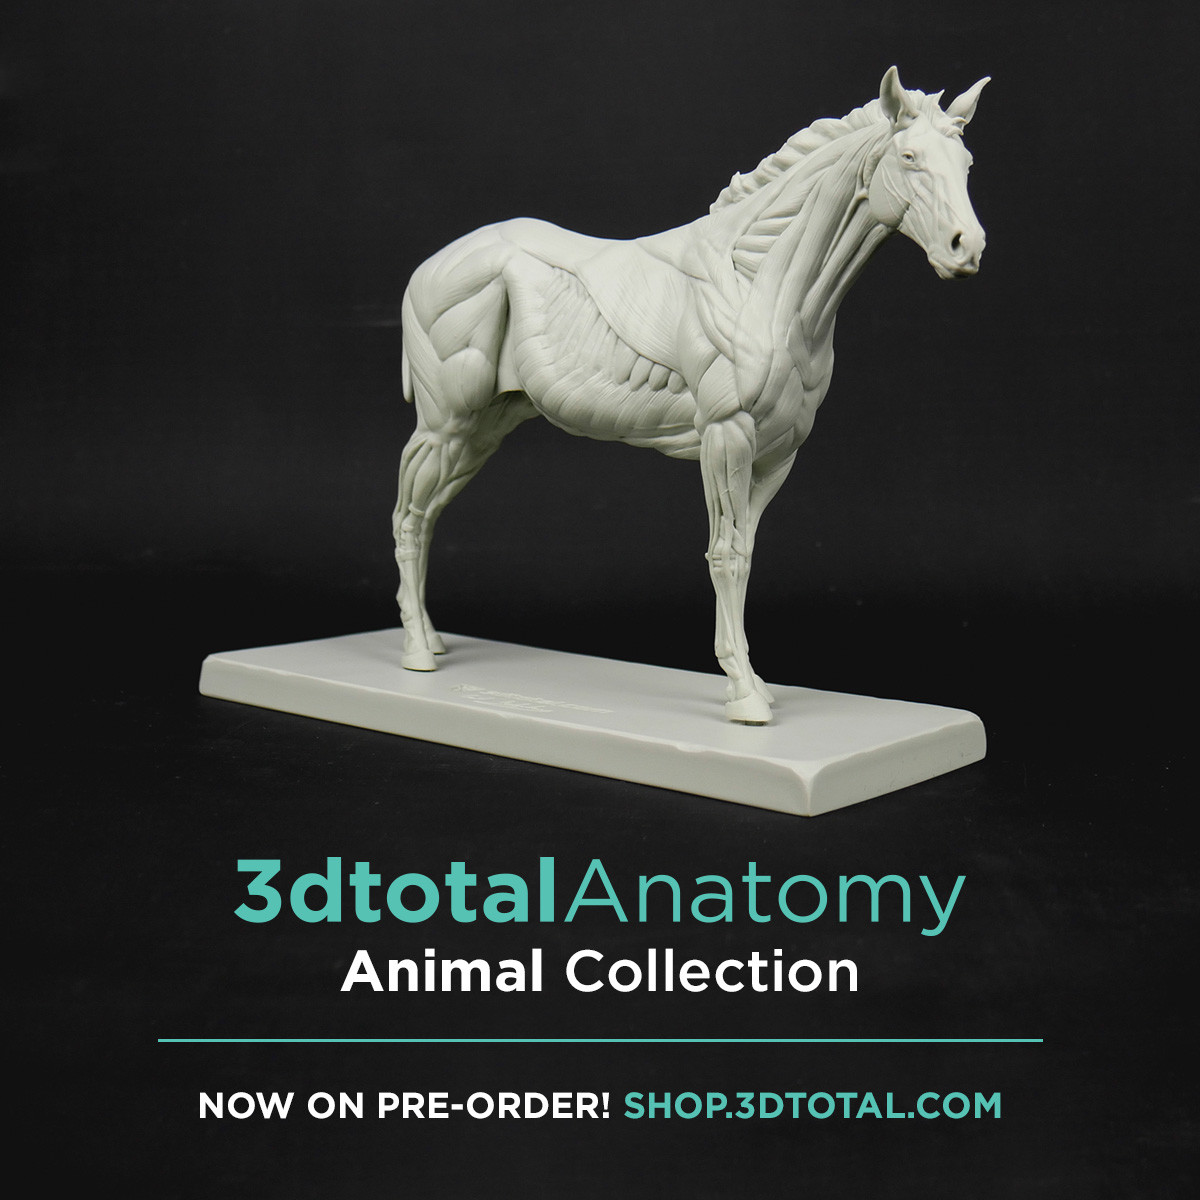 If you want to order the Equine ecorche :
https://shop.3dtotal.com/anatomy-figure/animal-anatomy-figures/3dtotal-anatomy-equine-figure.html